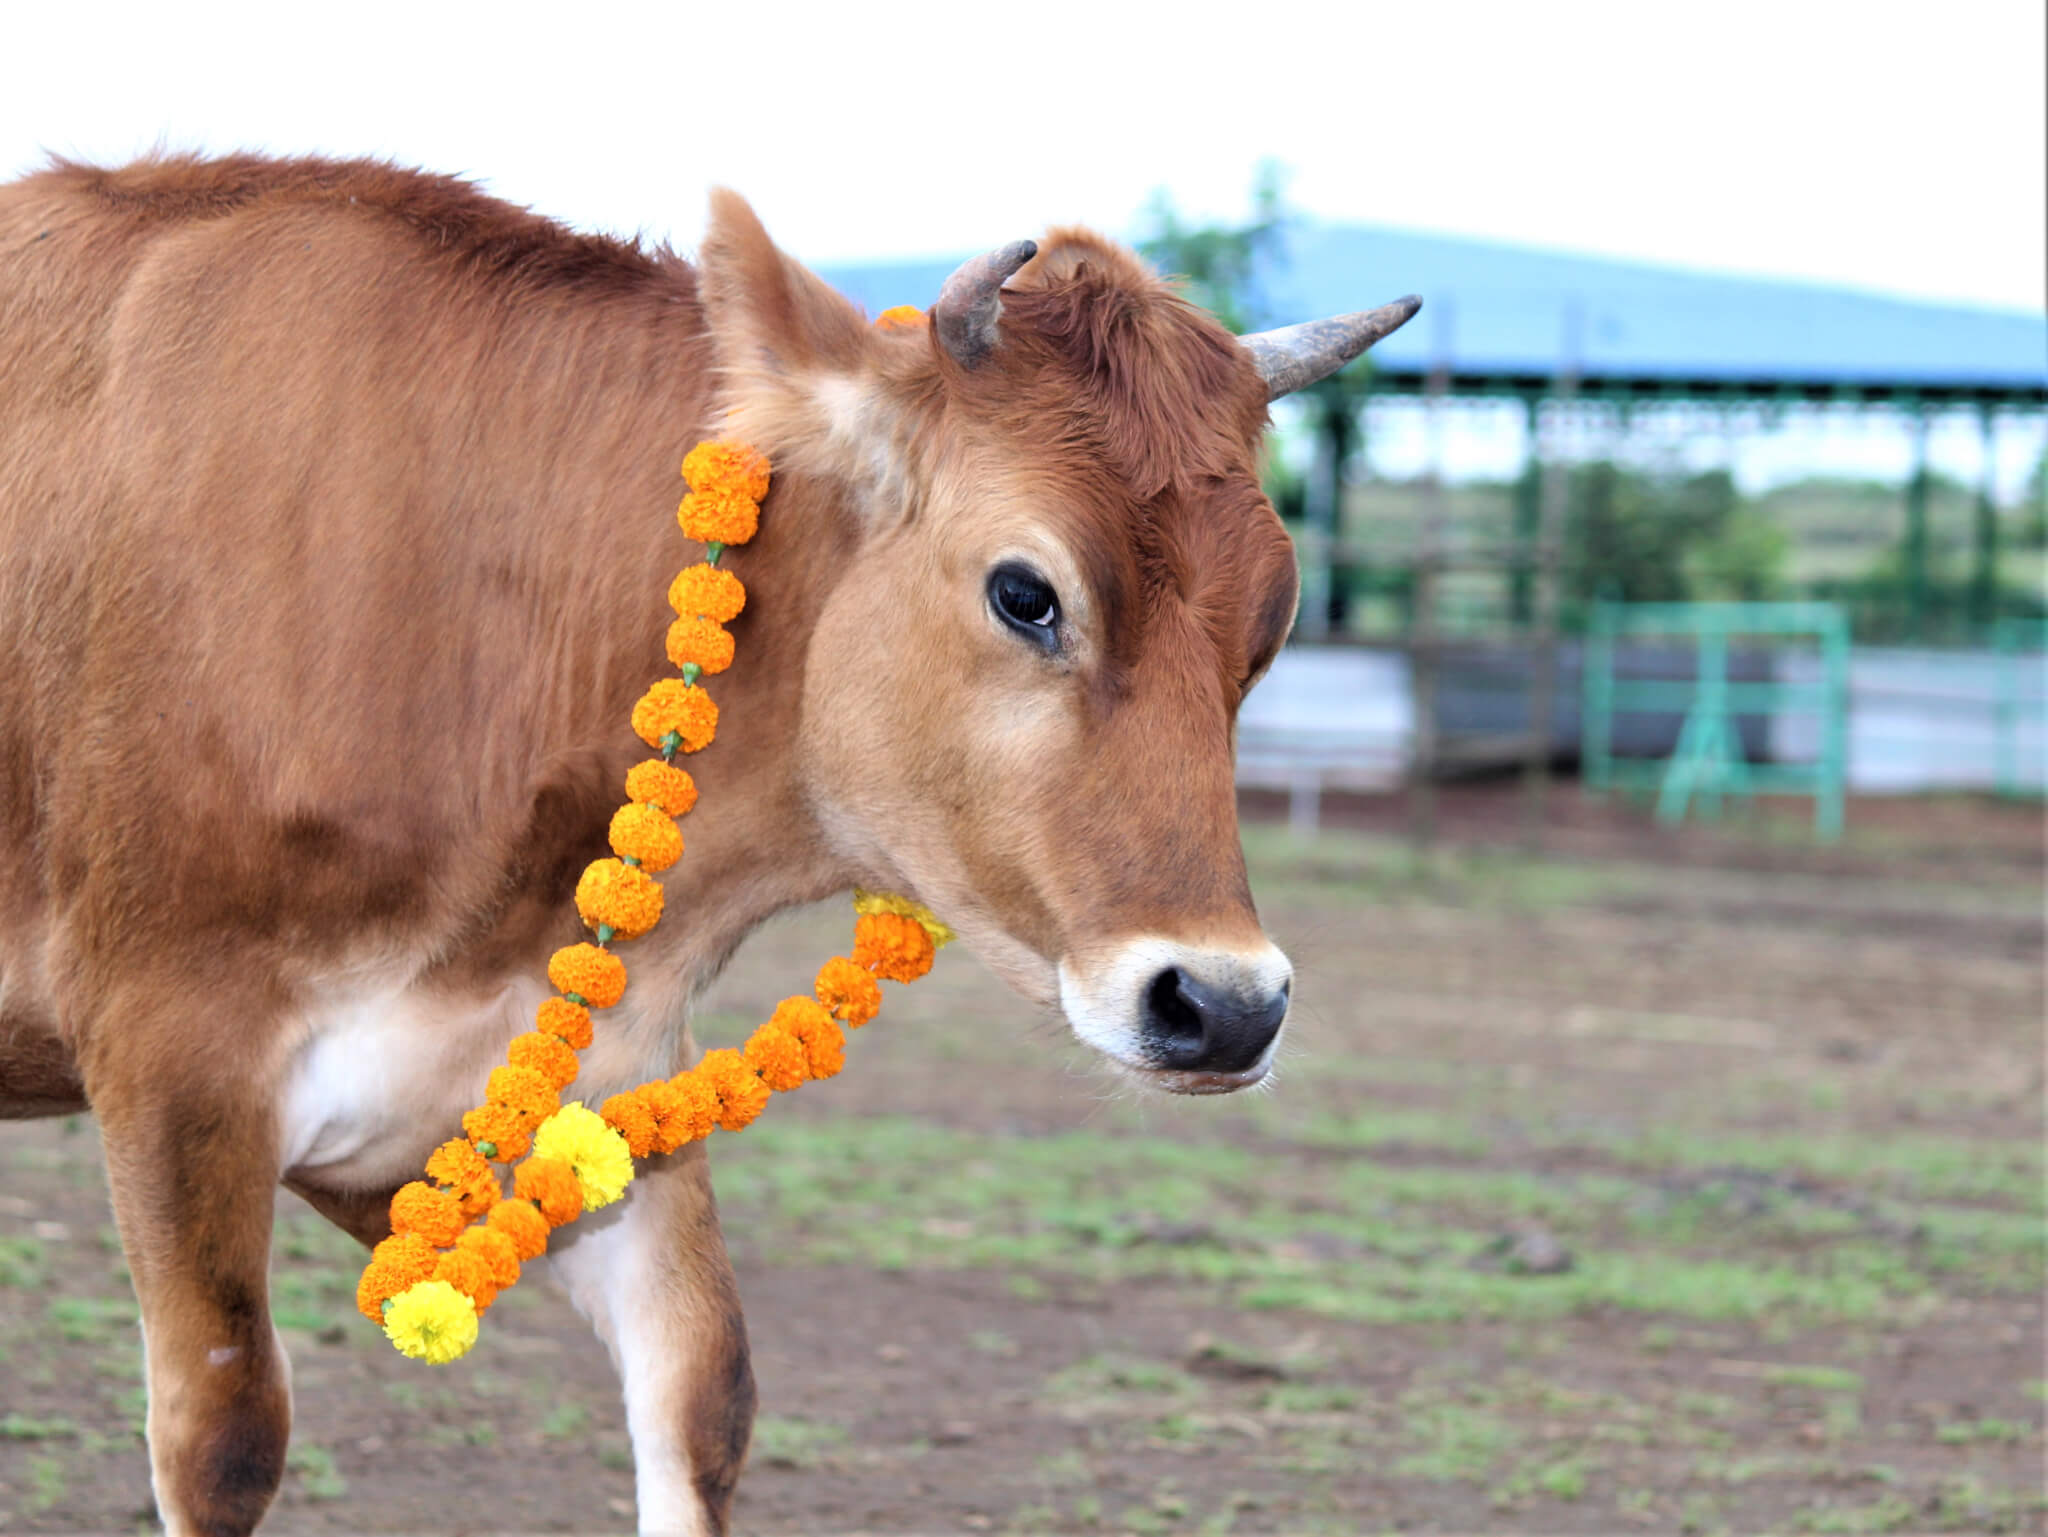 Rescued calf Sheila struts around the sanctuary showing off her new accessory.